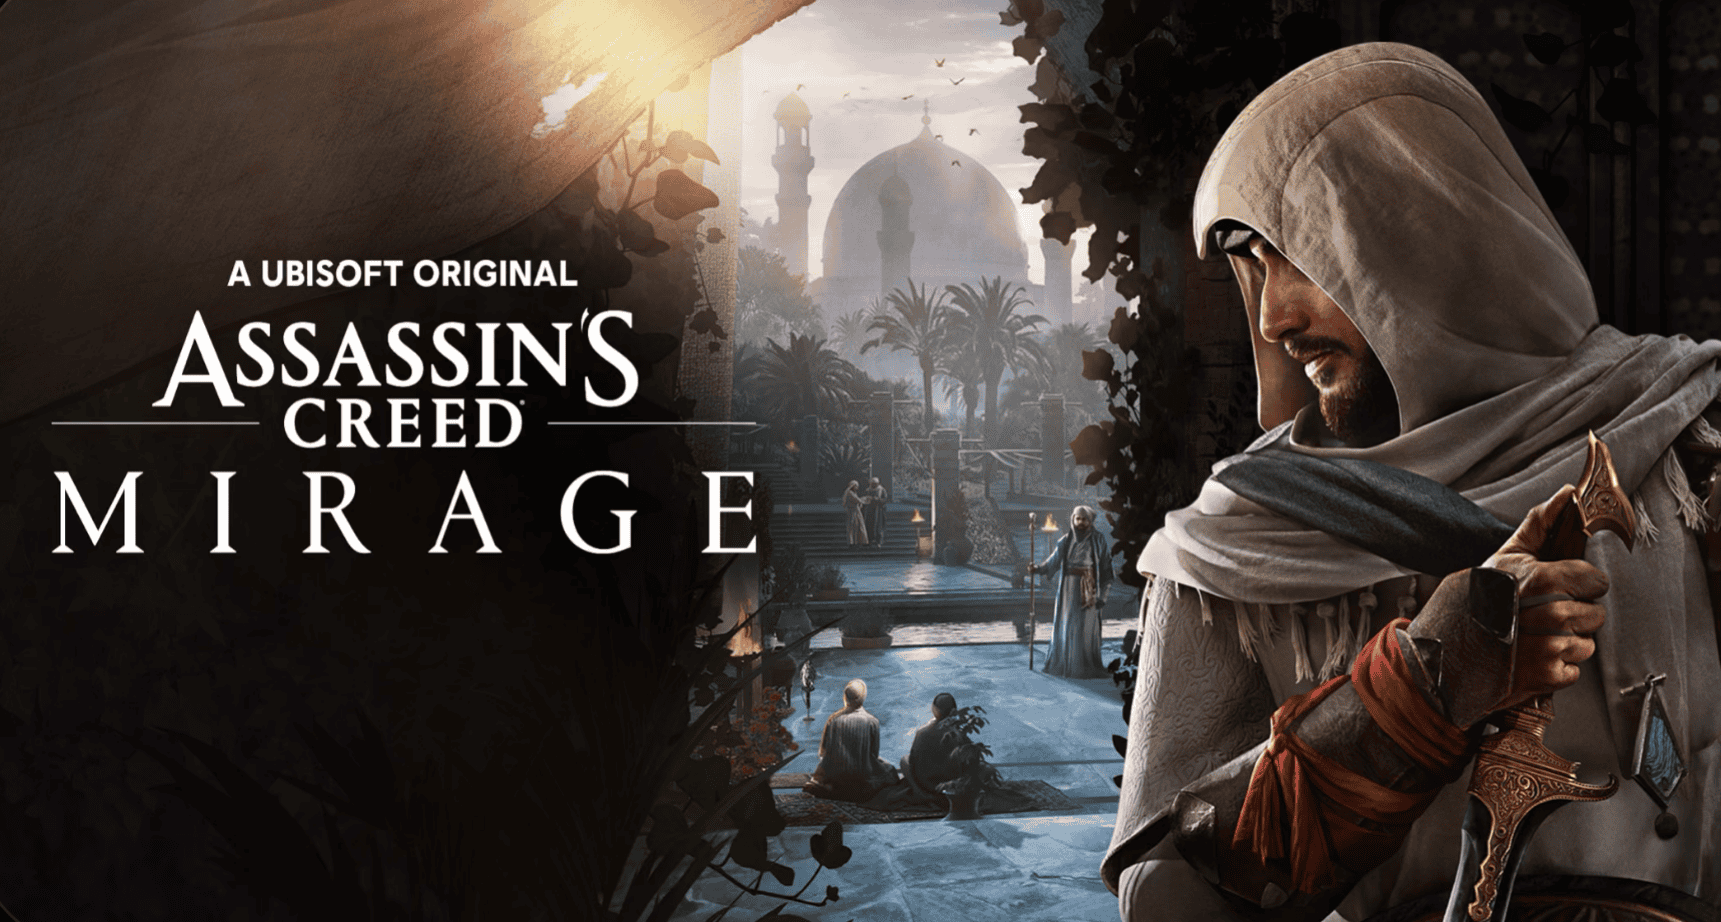 Assassin’s Creed Mirage Arrives on iOS and iPadOS, But You May Not Be Able to Play It